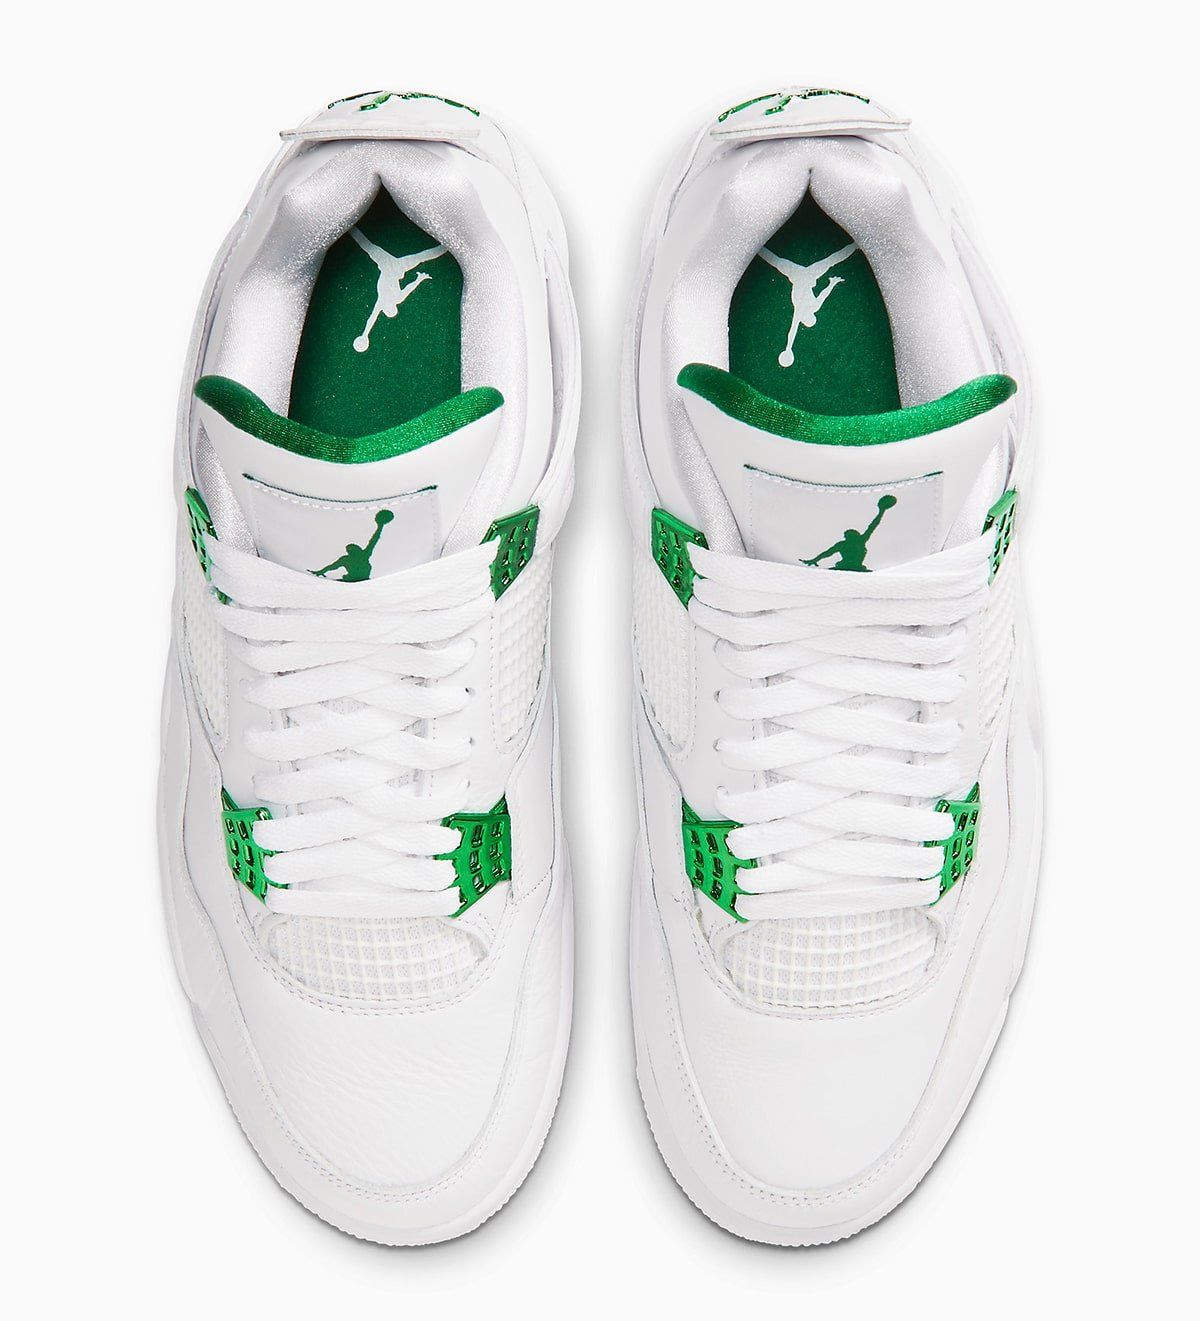 white and green 4s 2020